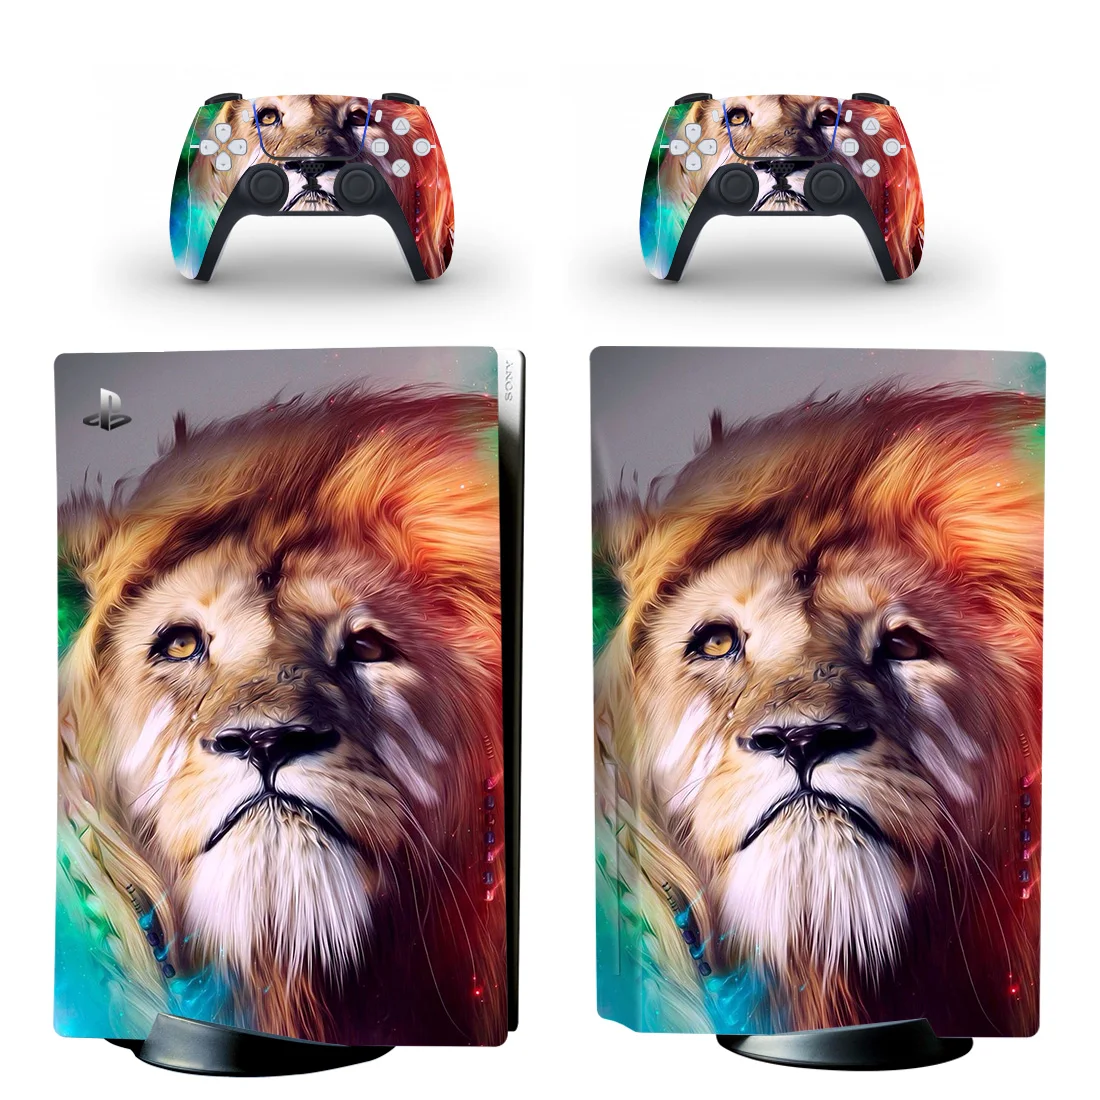 

Animal Lion PS5 Disc Skin Sticker Cover for Playstation 5 Console & 2 Controllers Decal Vinyl Protective Disk Skins